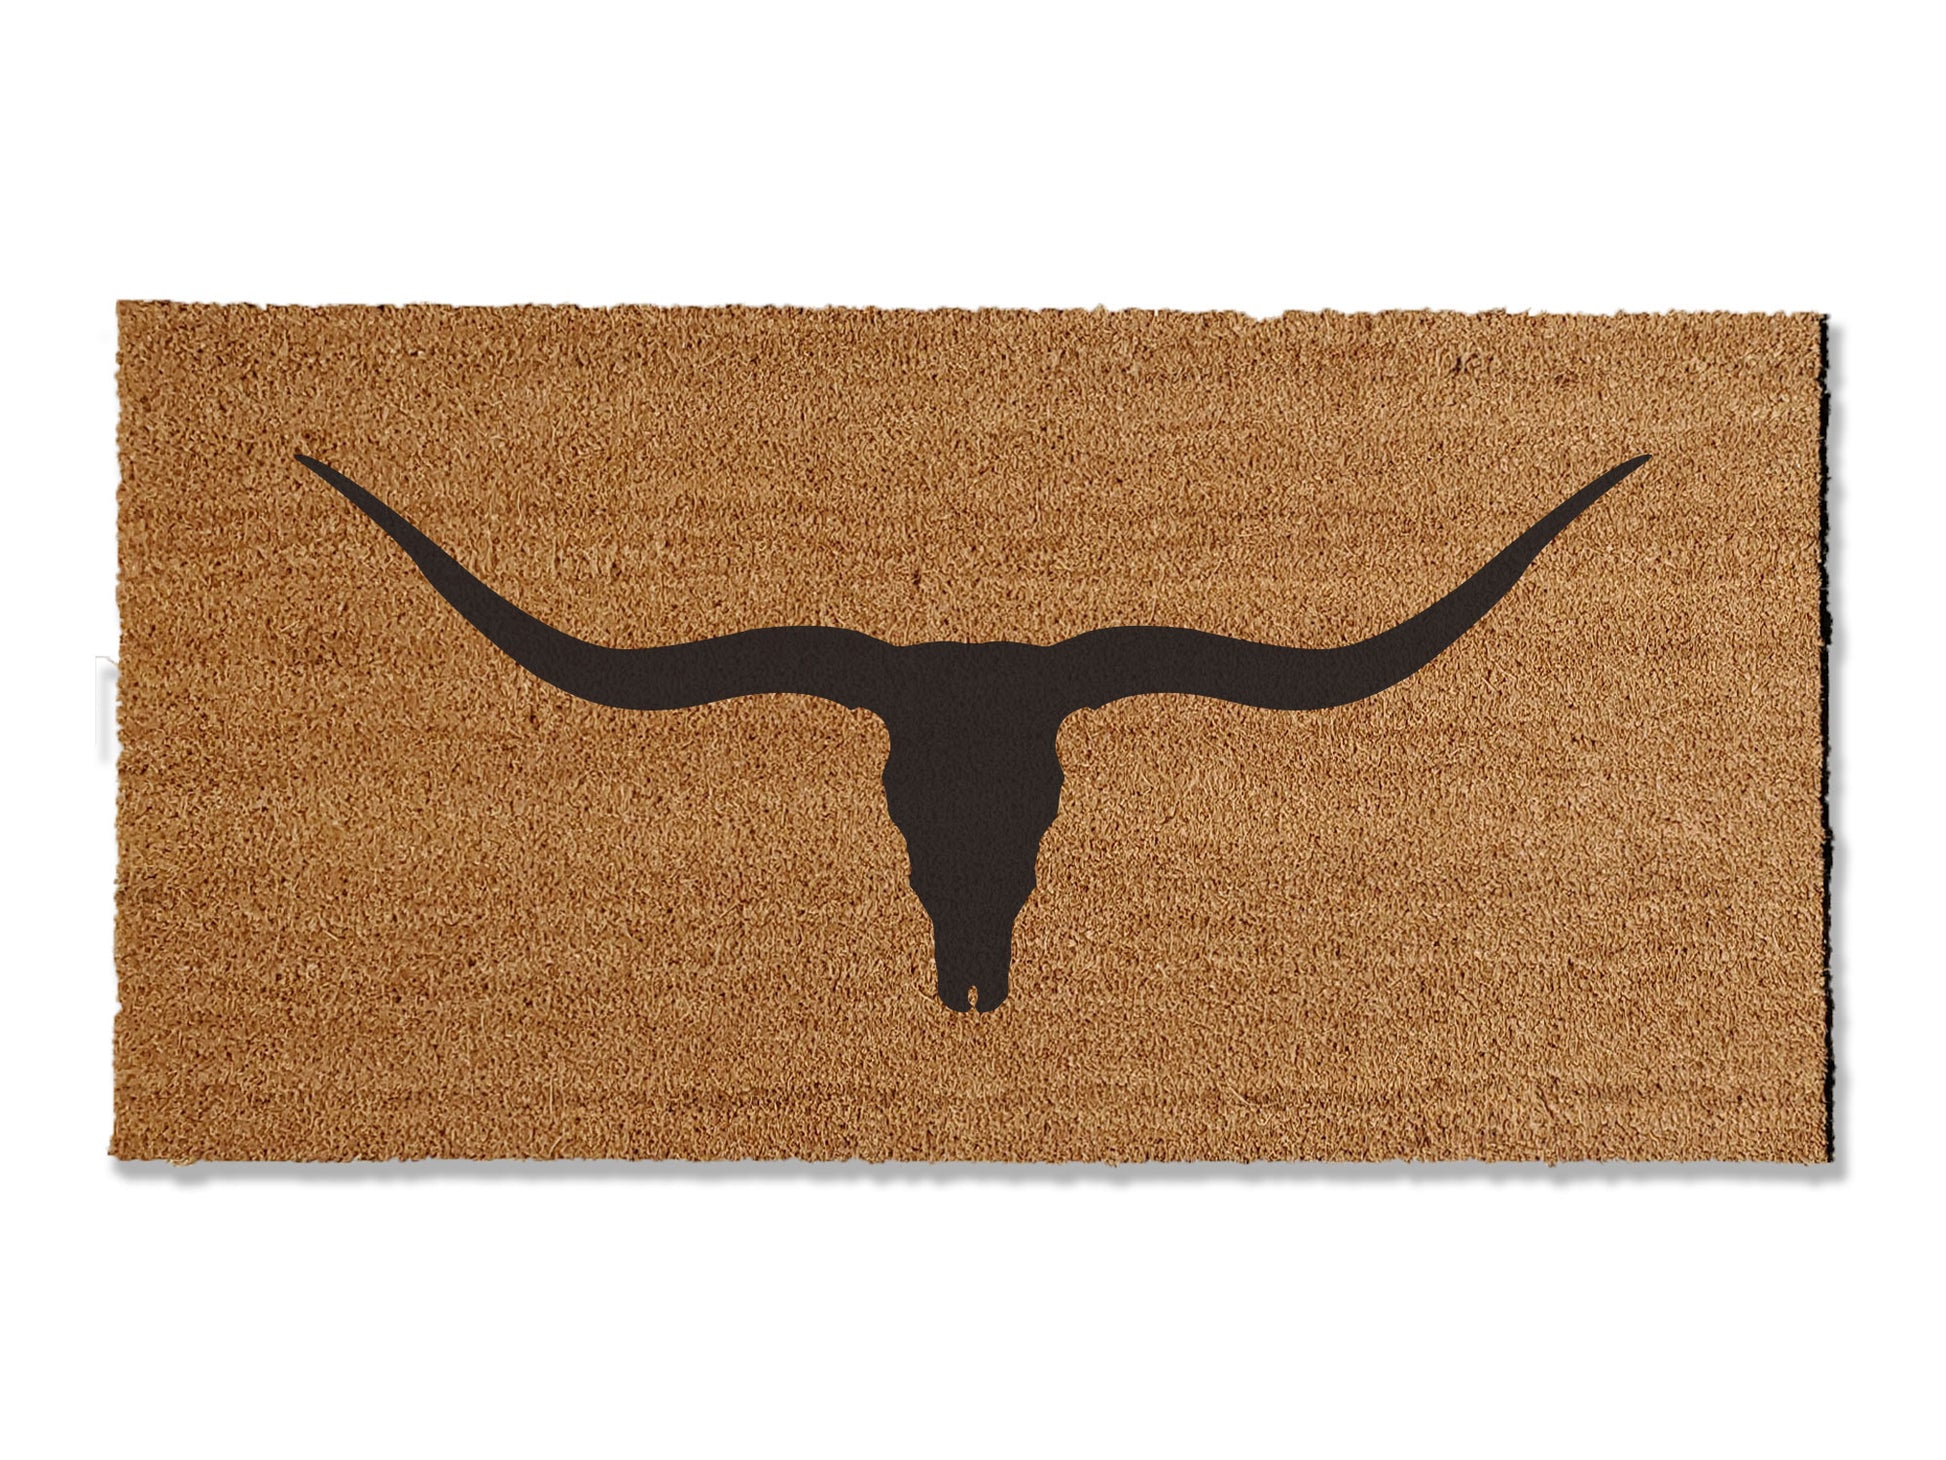 Infuse a touch of southwestern charm with our coir doormat showcasing a Texas Longhorn skull. Available in multiple sizes, this rustic design adds character to your doorstep. With its effective dirt-trapping capabilities, this mat combines style and functionality to enhance your entryway.